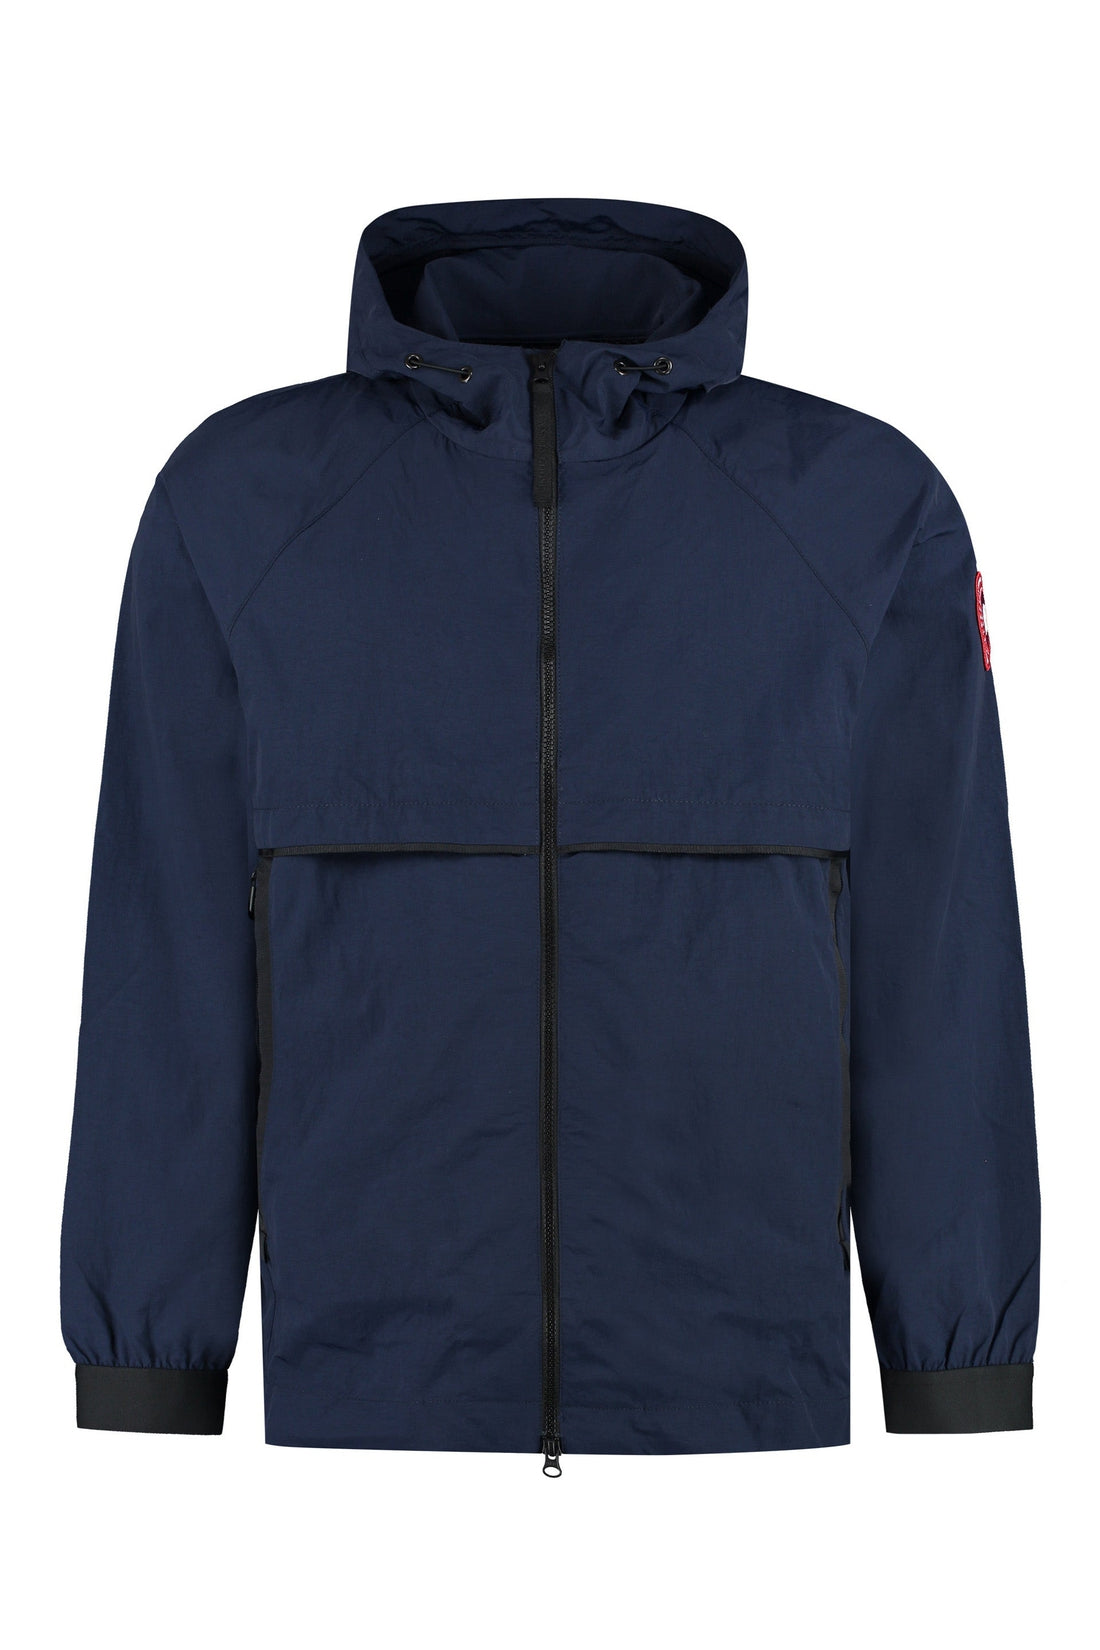 Canada Goose-OUTLET-SALE-Faber technical fabric hooded jacket-ARCHIVIST